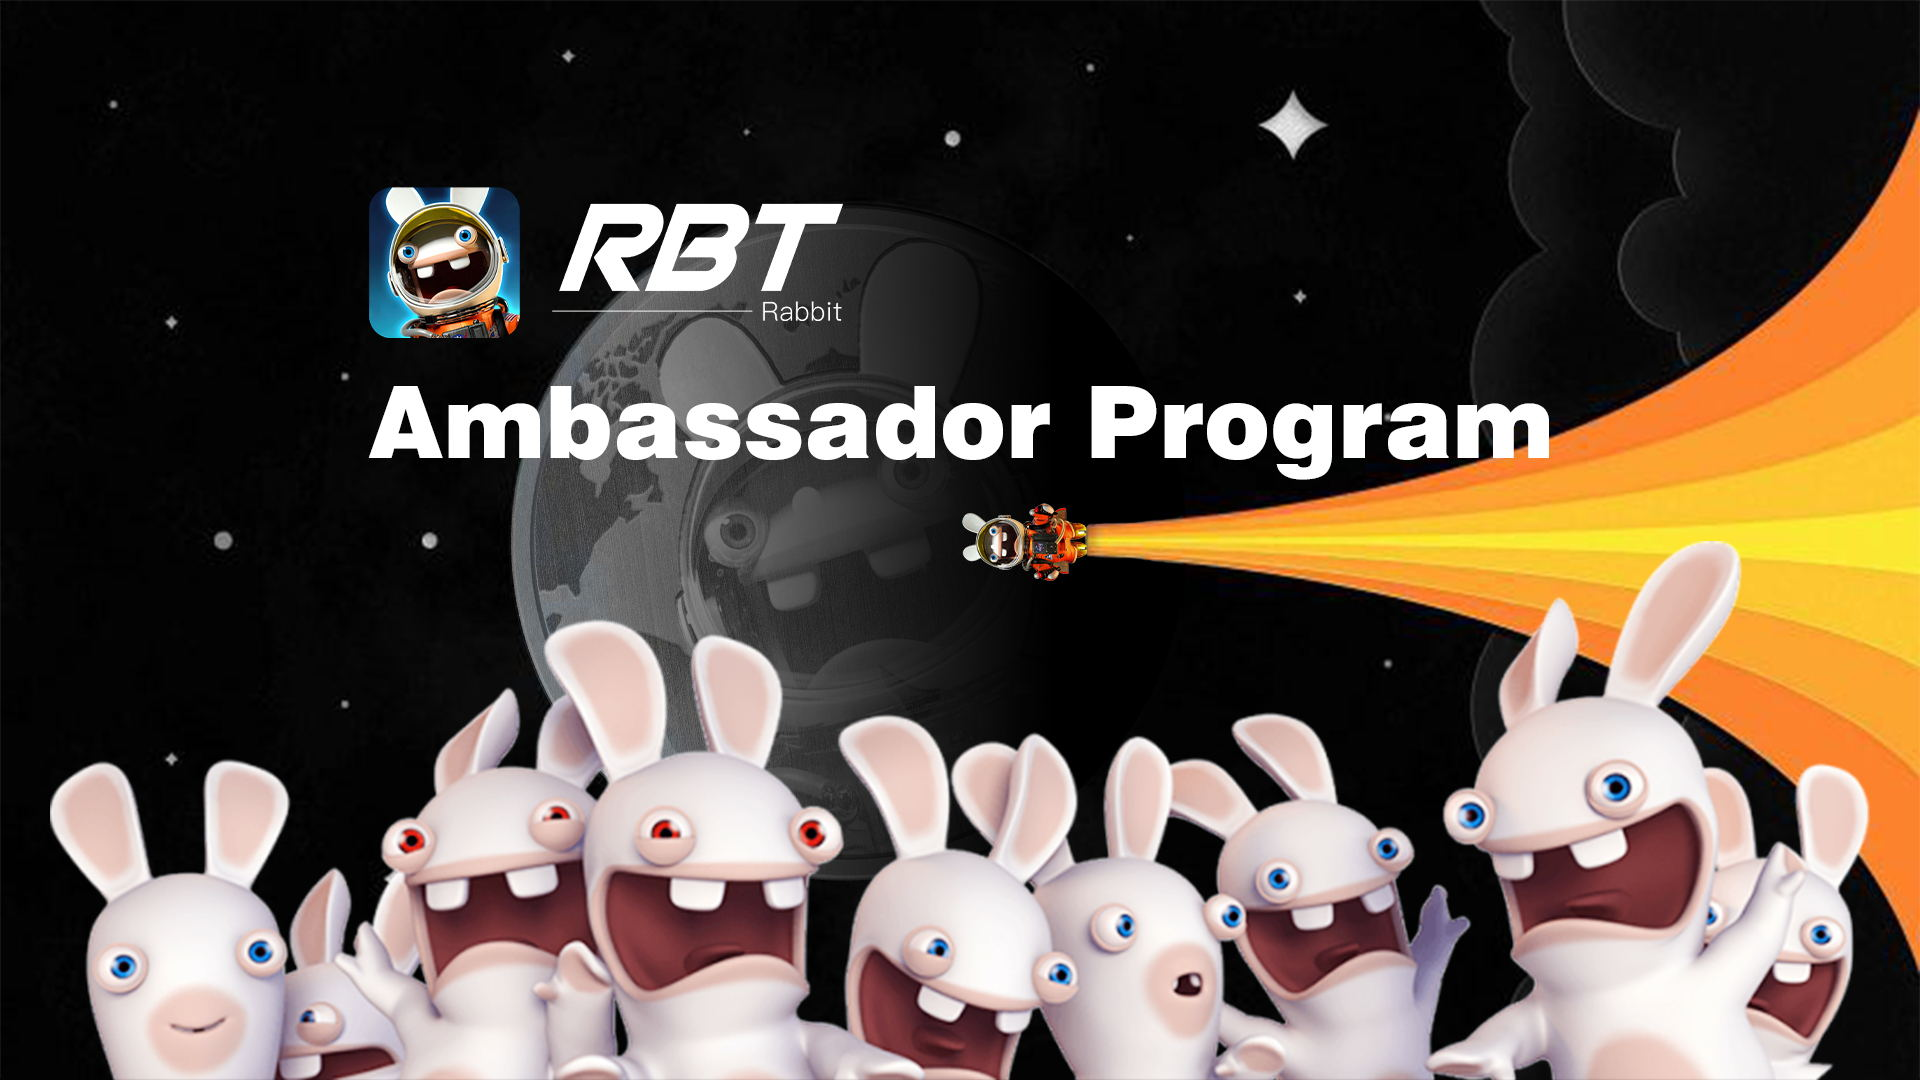 Mars Rabbit, a new BSC deployed DEFI + NFT blockchain project roaring across the horizon- the next generation community token that is positioned to surpass Dogecoin